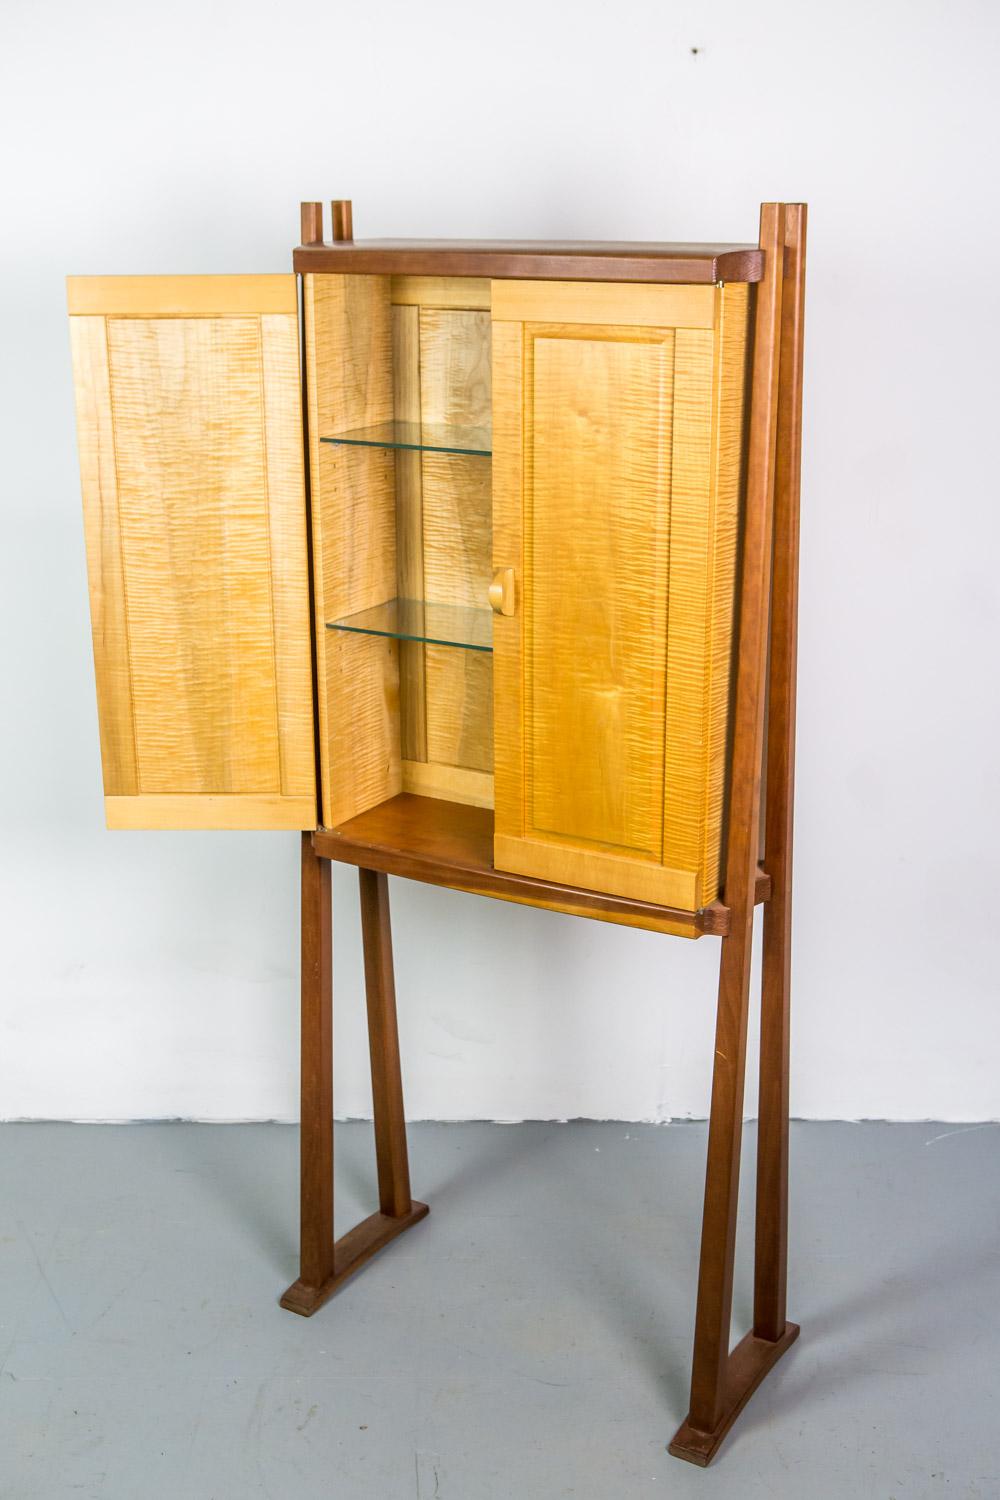 Studio Cabinet in Wood by American Craftsman Mike Bartell For Sale 2